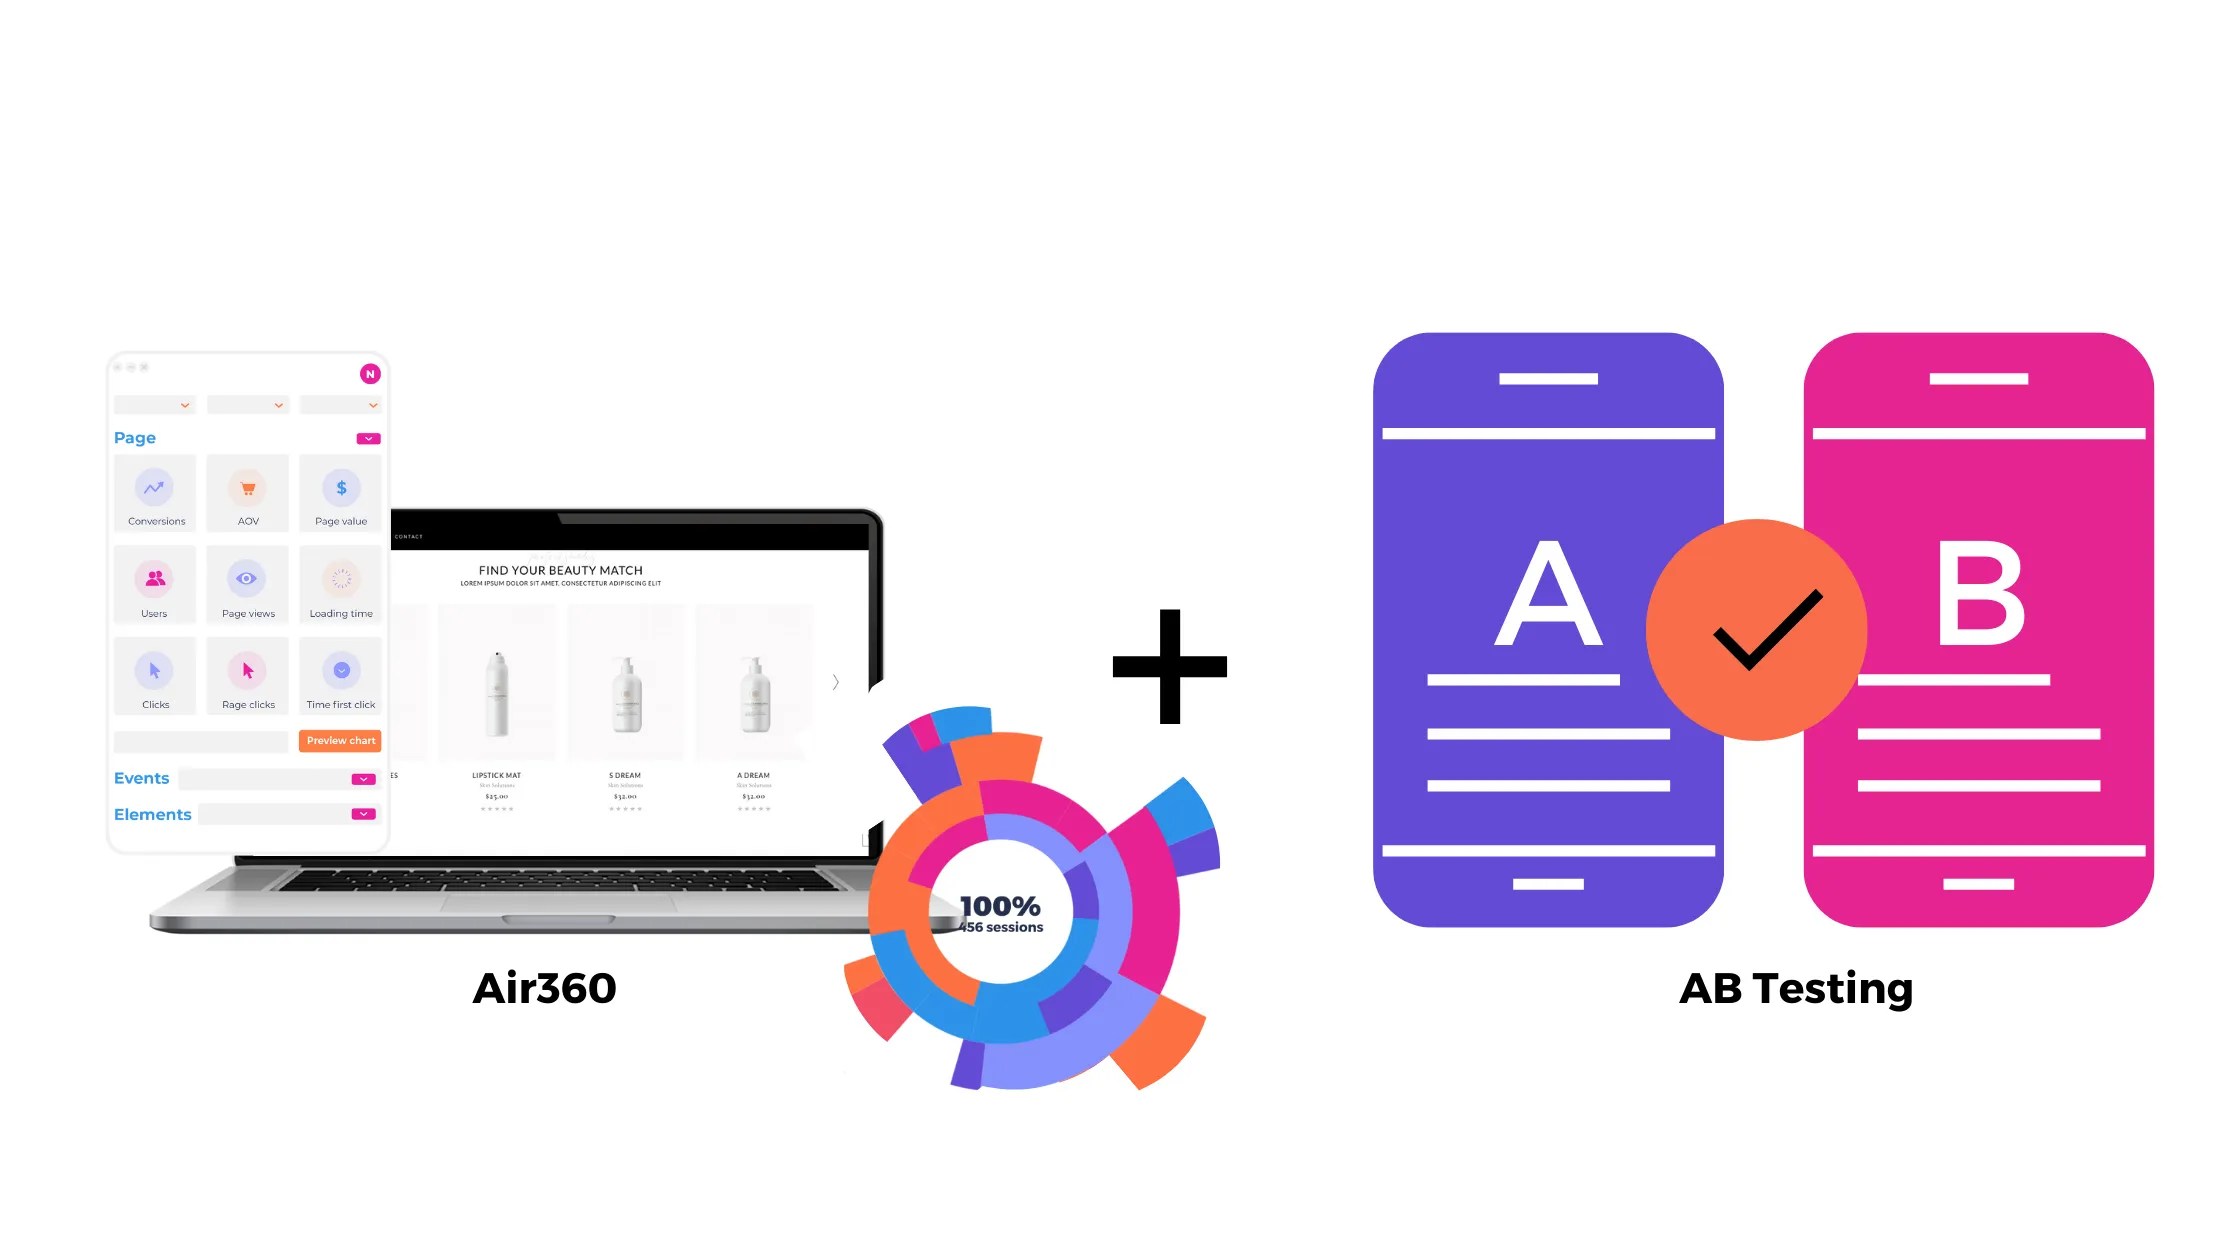 Maximizing Conversion - The Perfect Match of A/B Testing and Air360